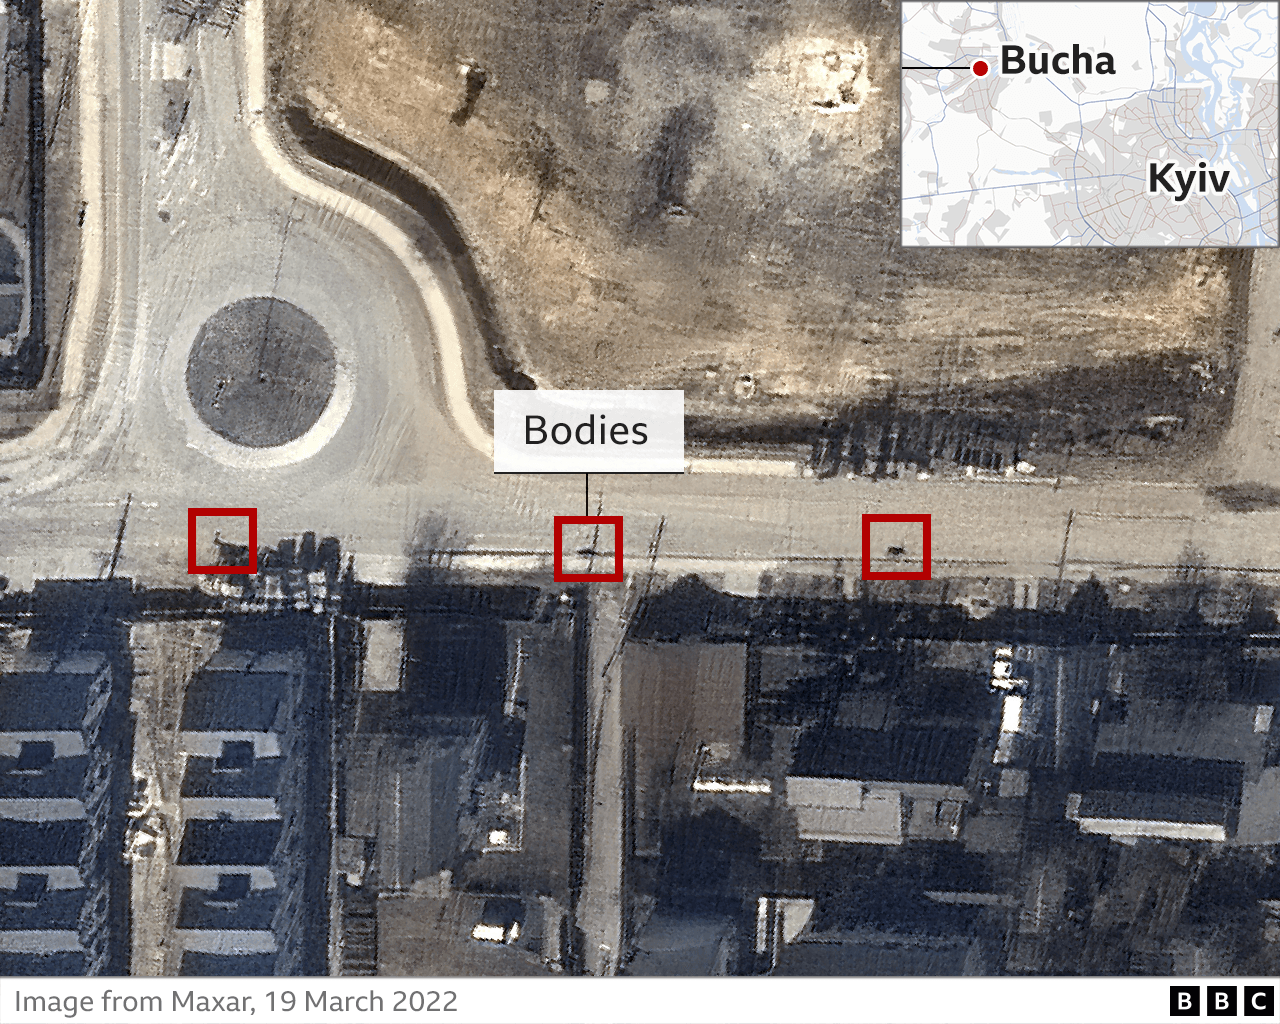 Bucha killings Satellite image of bodies site contradicts Russian claims